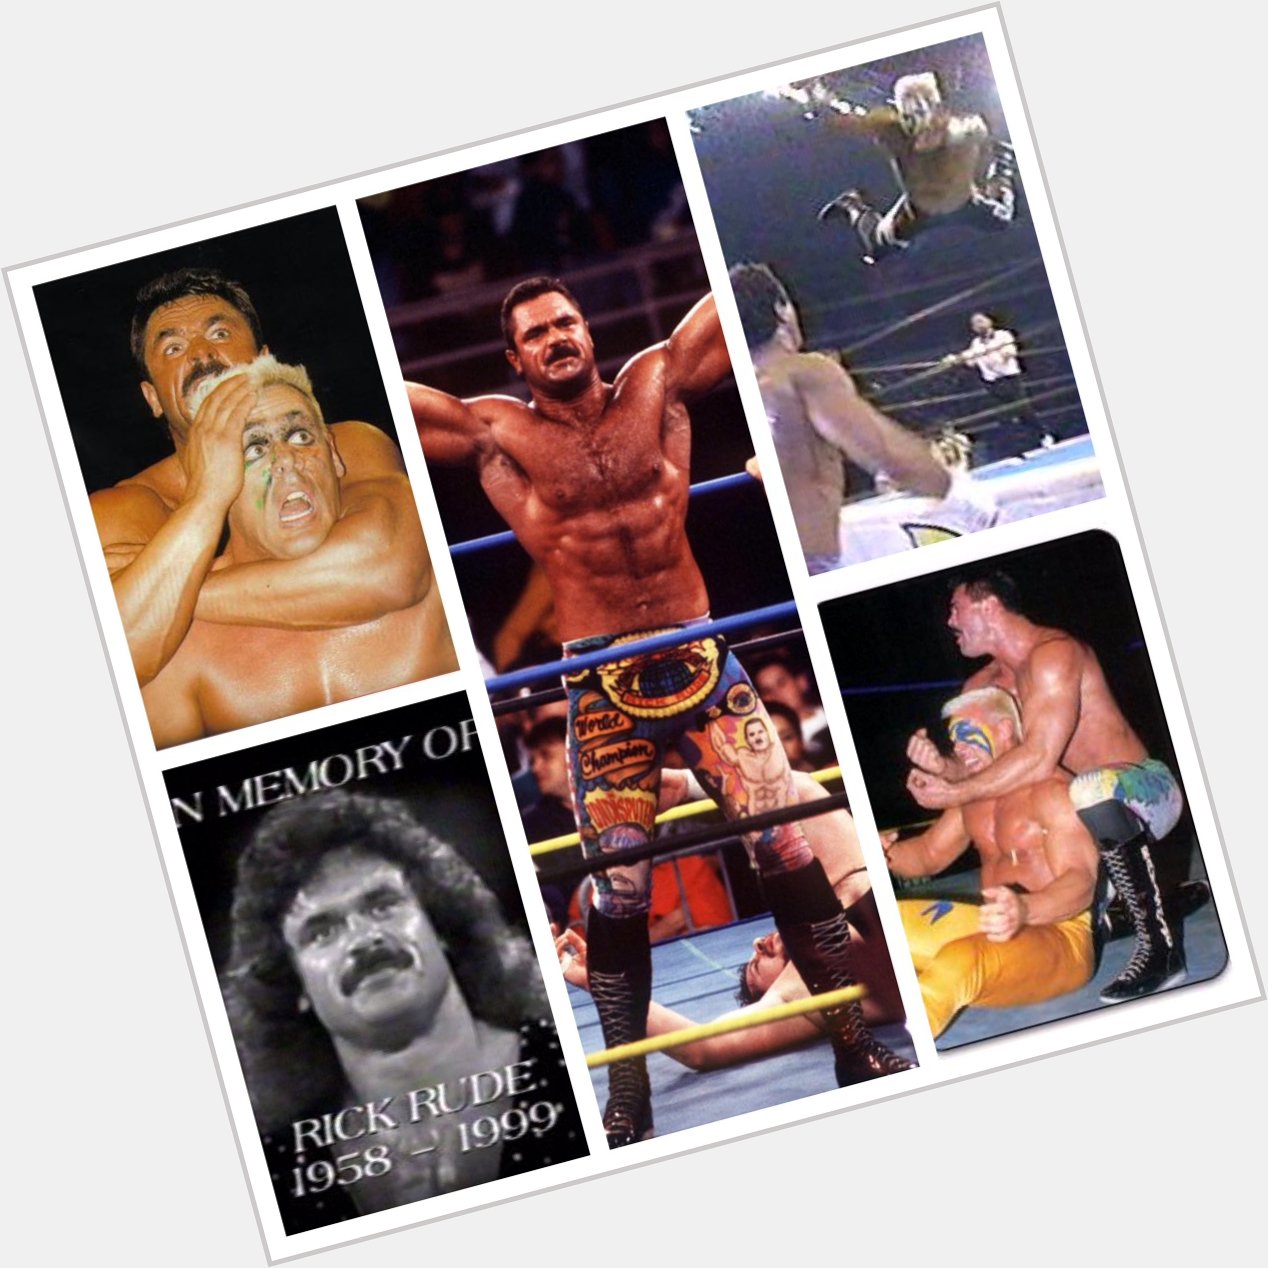 Happy Birthday to the late Rick Rude. I always enjoyed watching him & Sting feud. Deserves to be in the Hall of Fame 